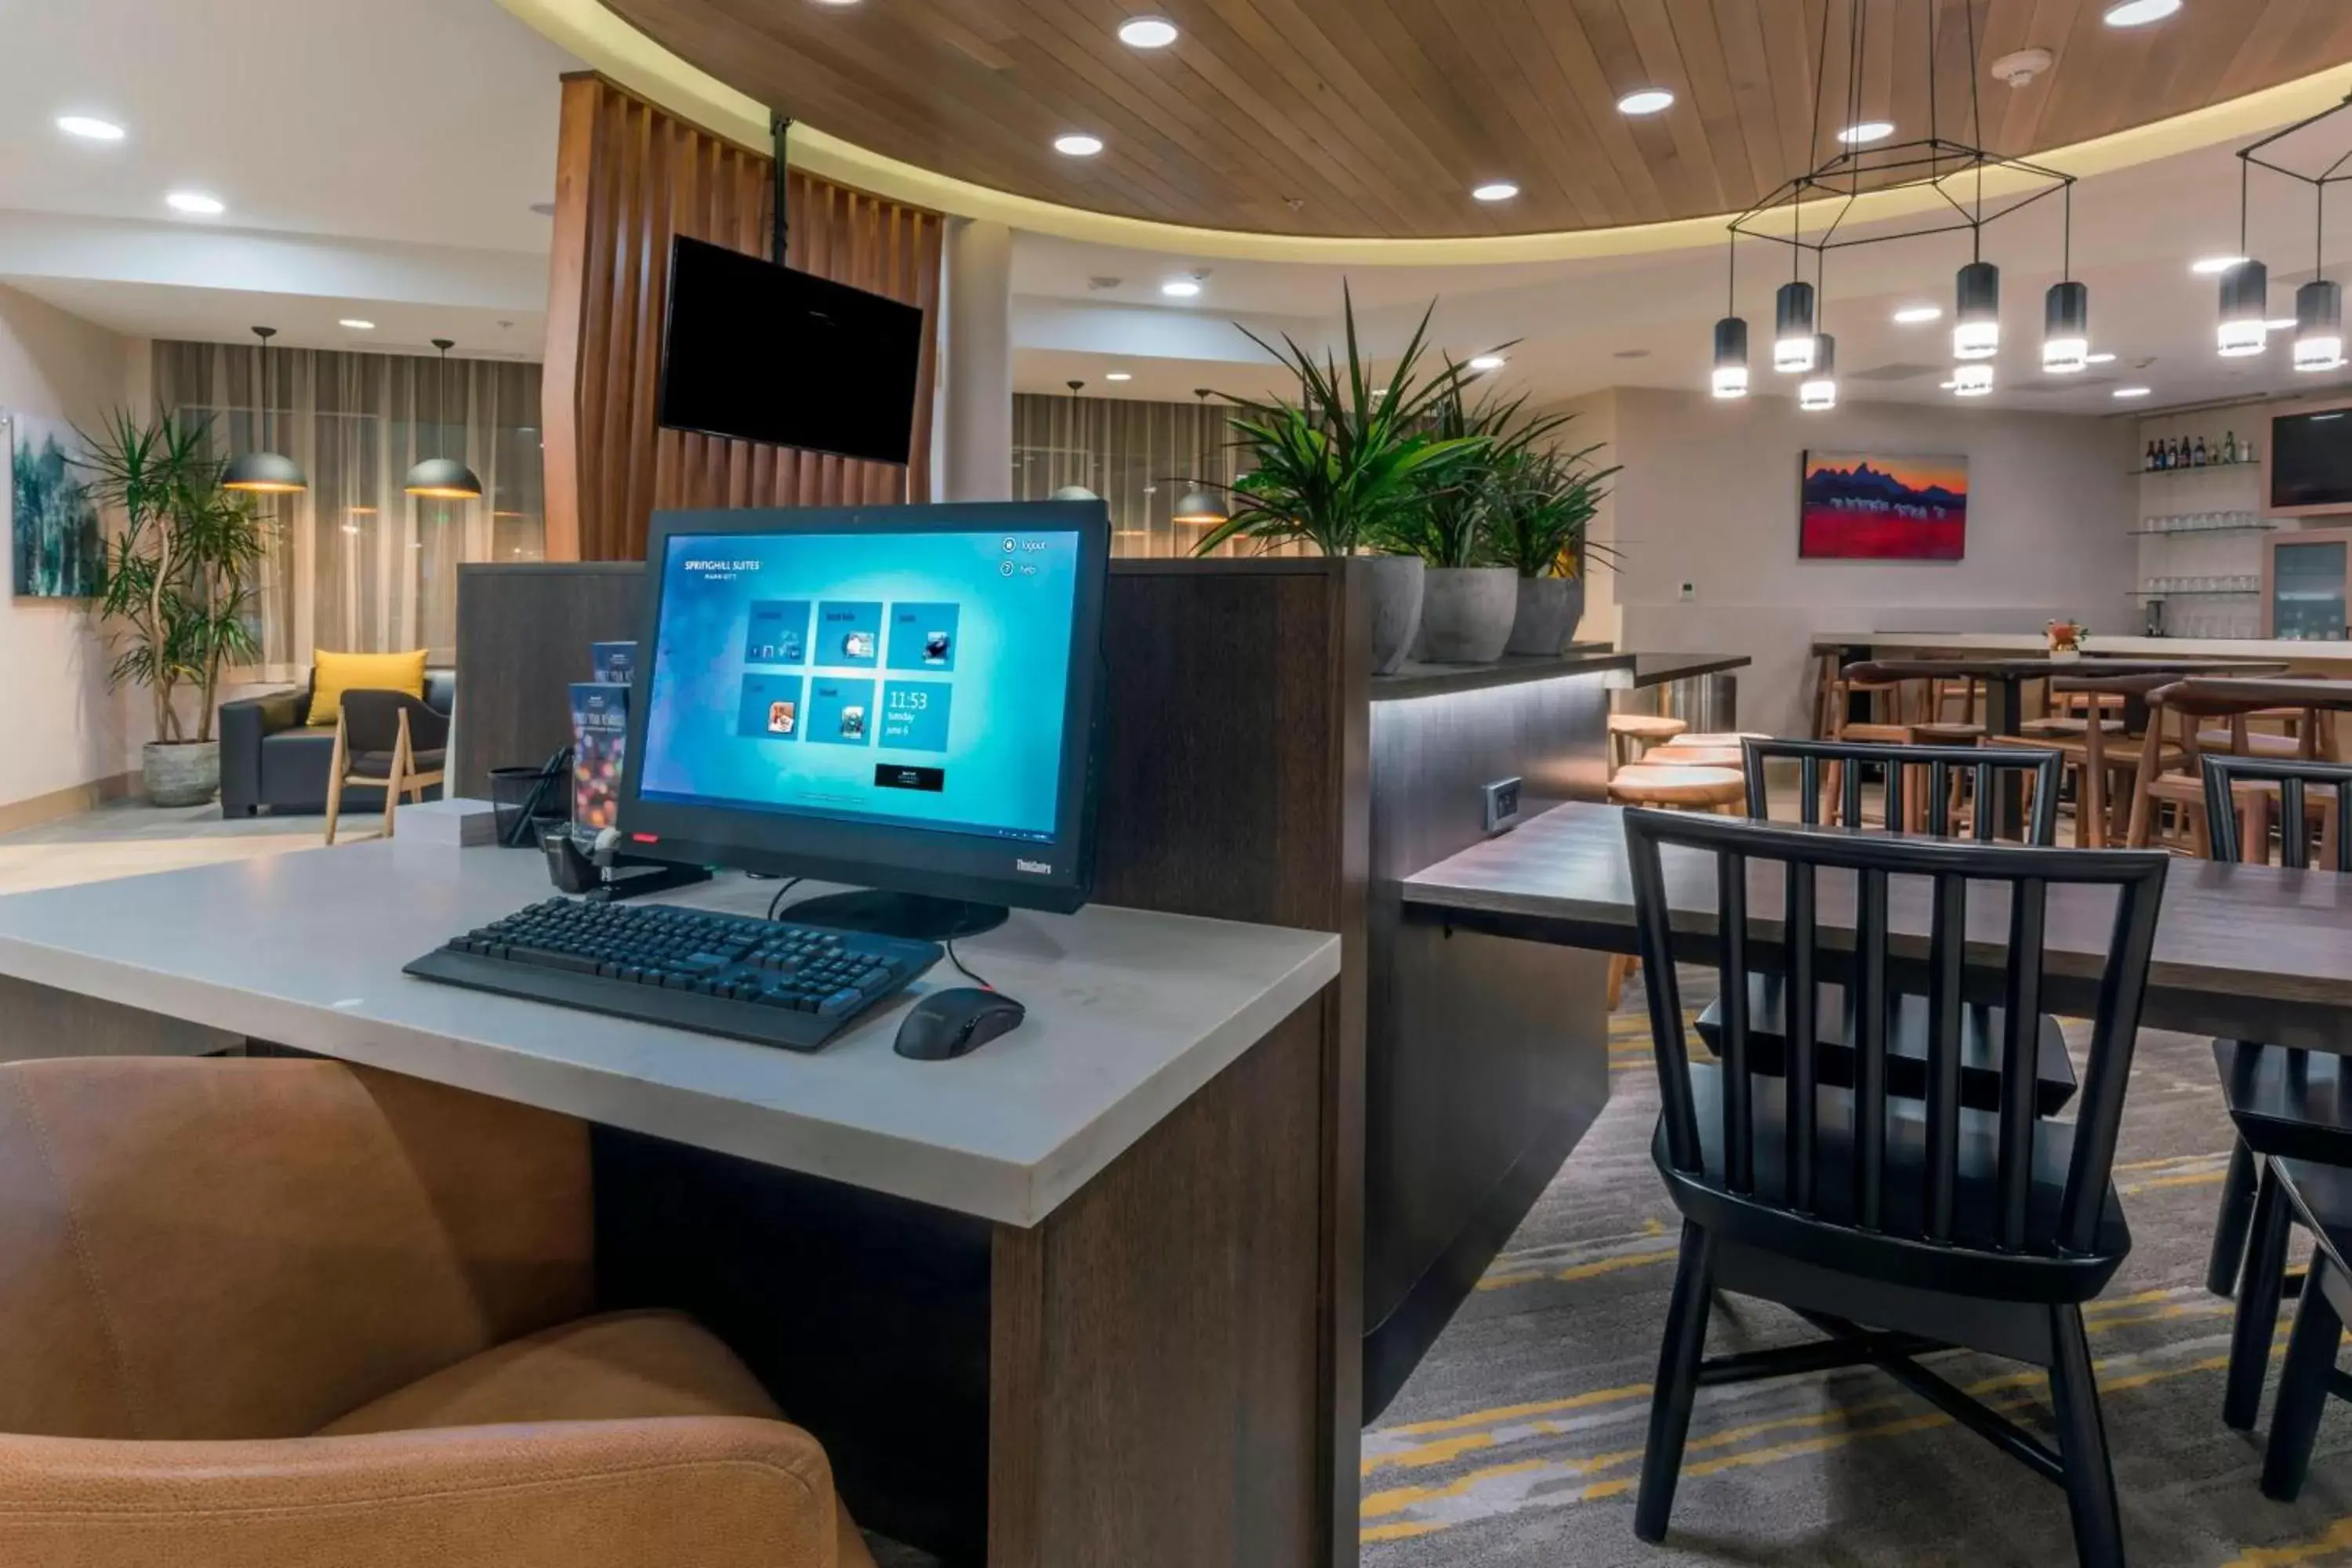 Business facilities in SpringHill Suites by Marriott Jackson Hole